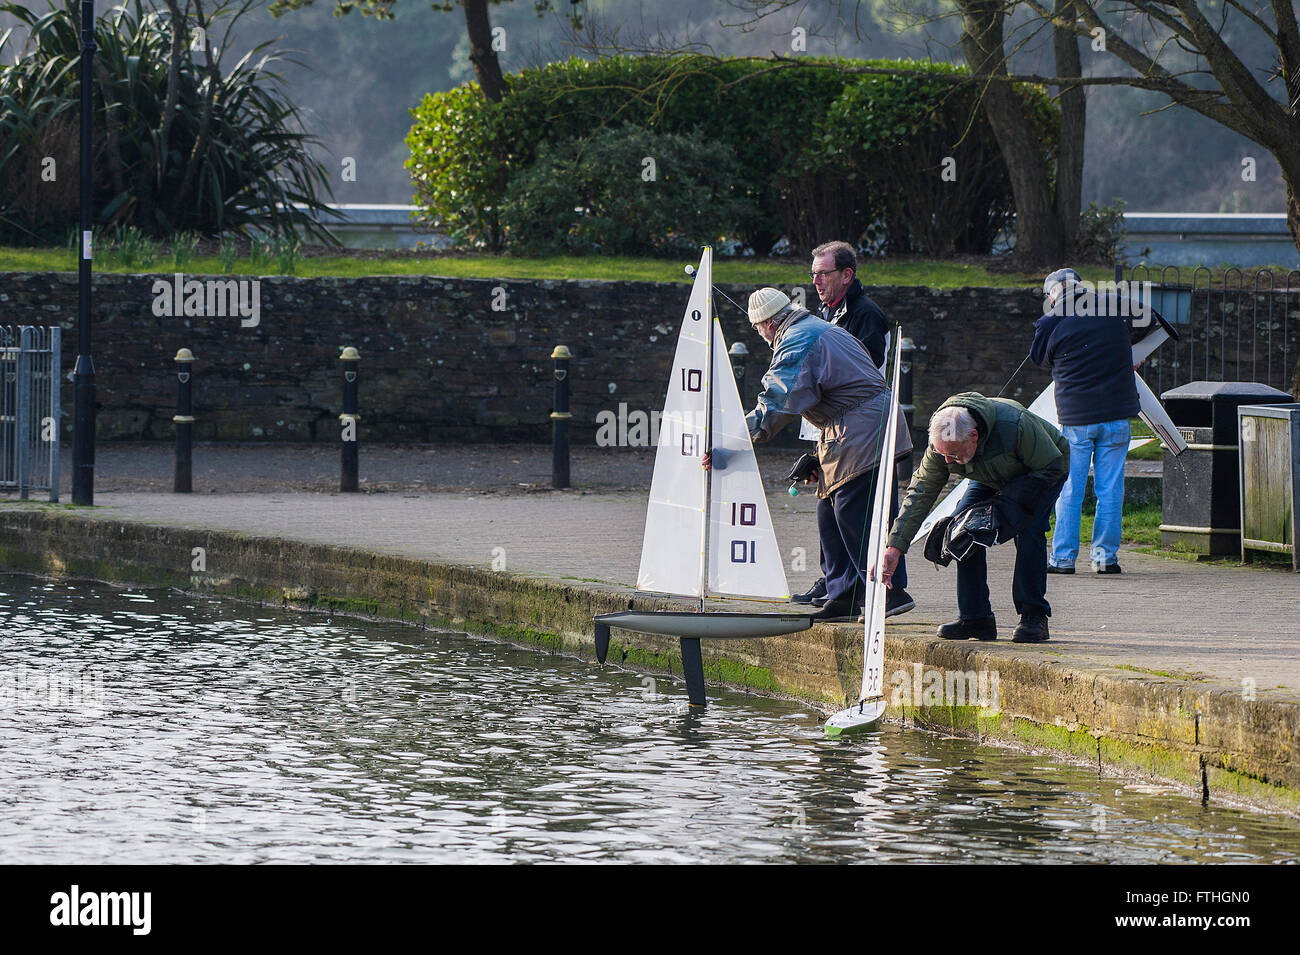 Members of the Newquay Model yacht Club prepare to launch their sail boats on Trenance Lake in Newquay, Cornwall. Stock Photo